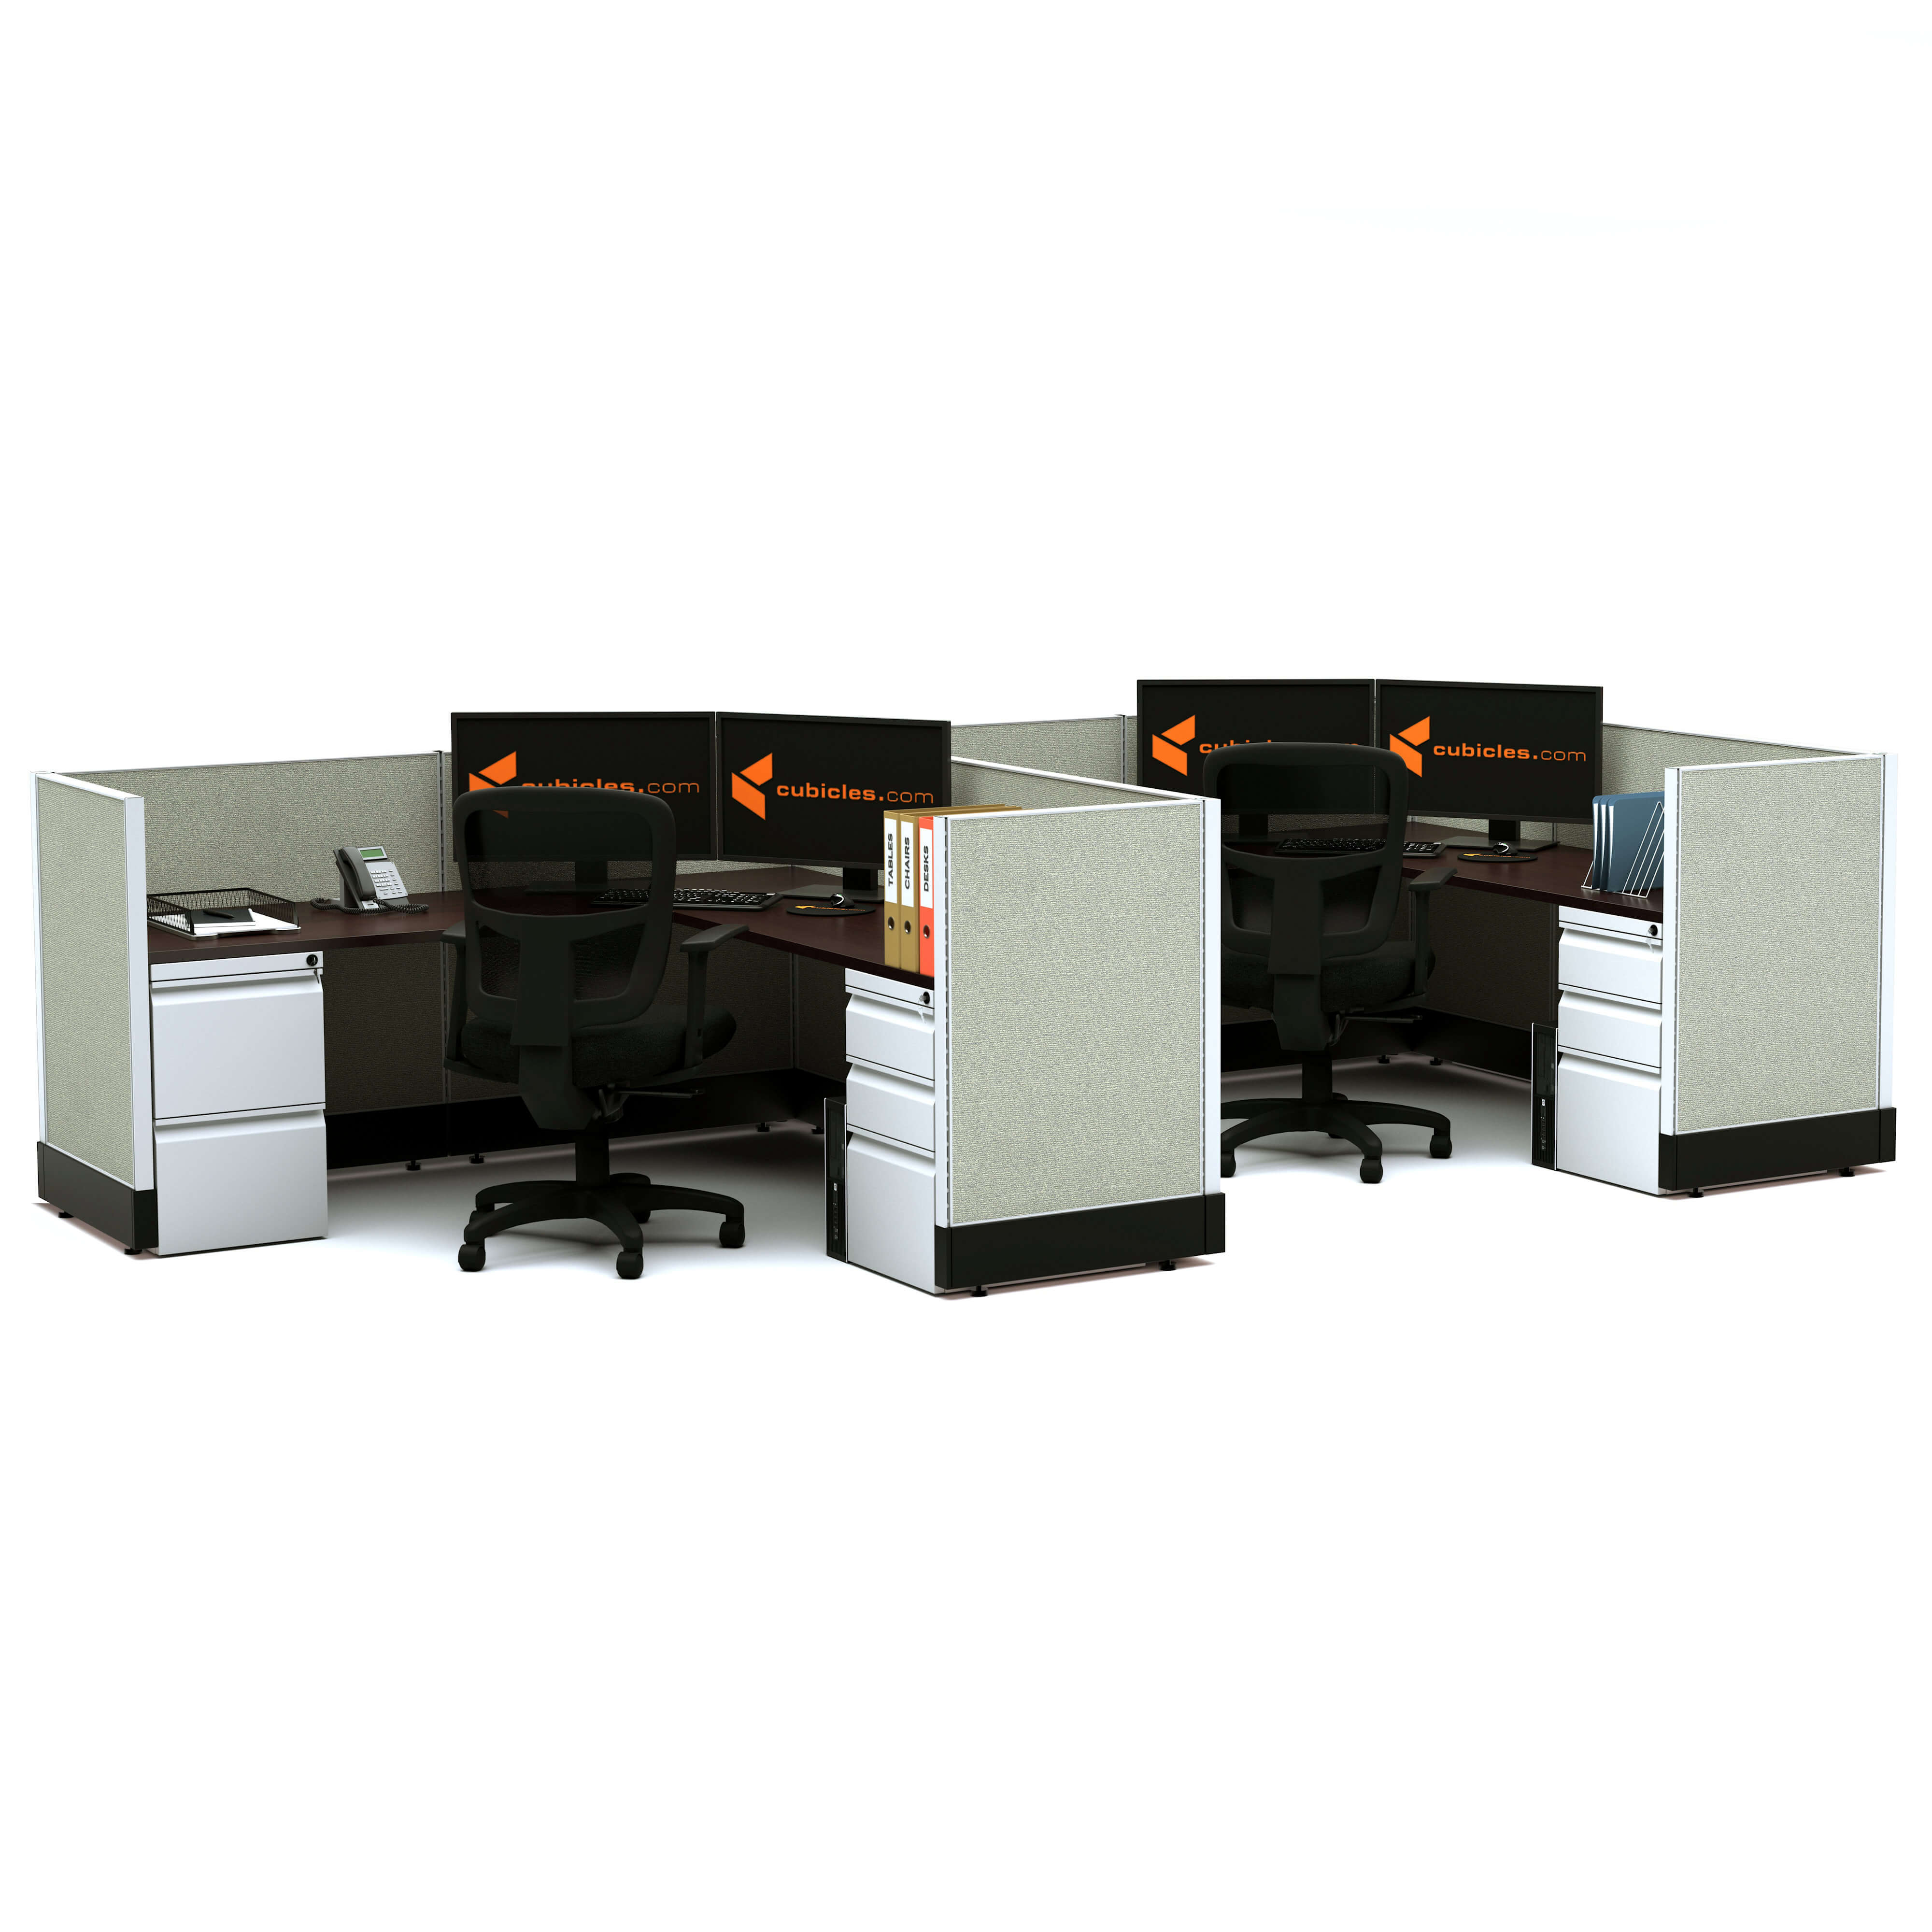 Modular office furniture system furniture 39 2pack inline powered